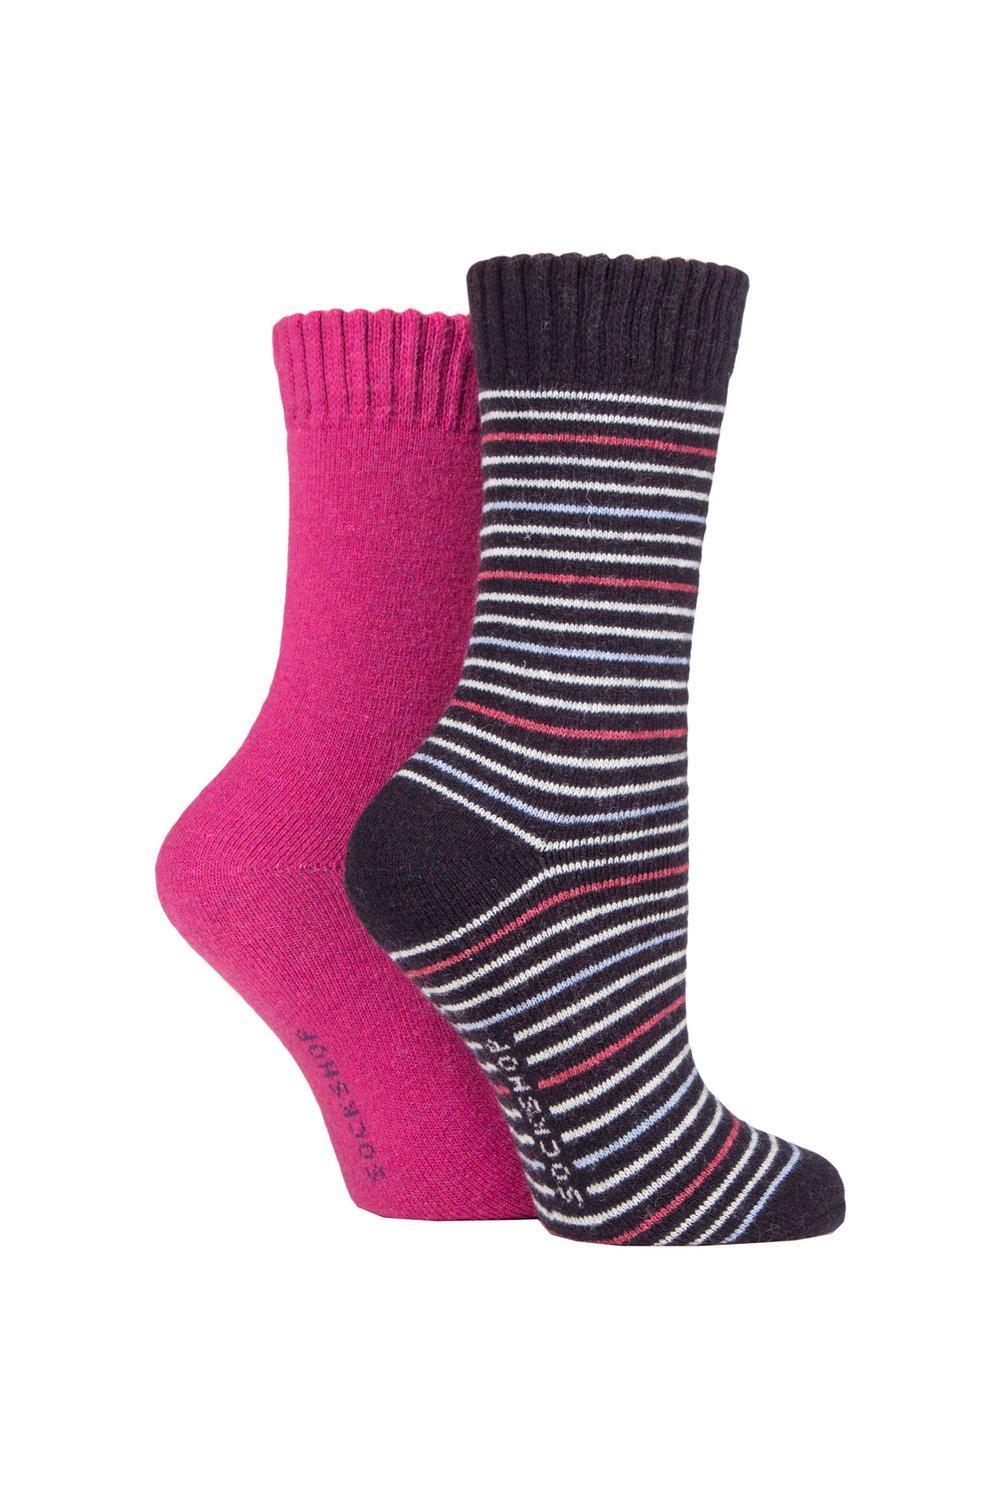 2 Pair Wool Mix Striped and Plain Boot Socks